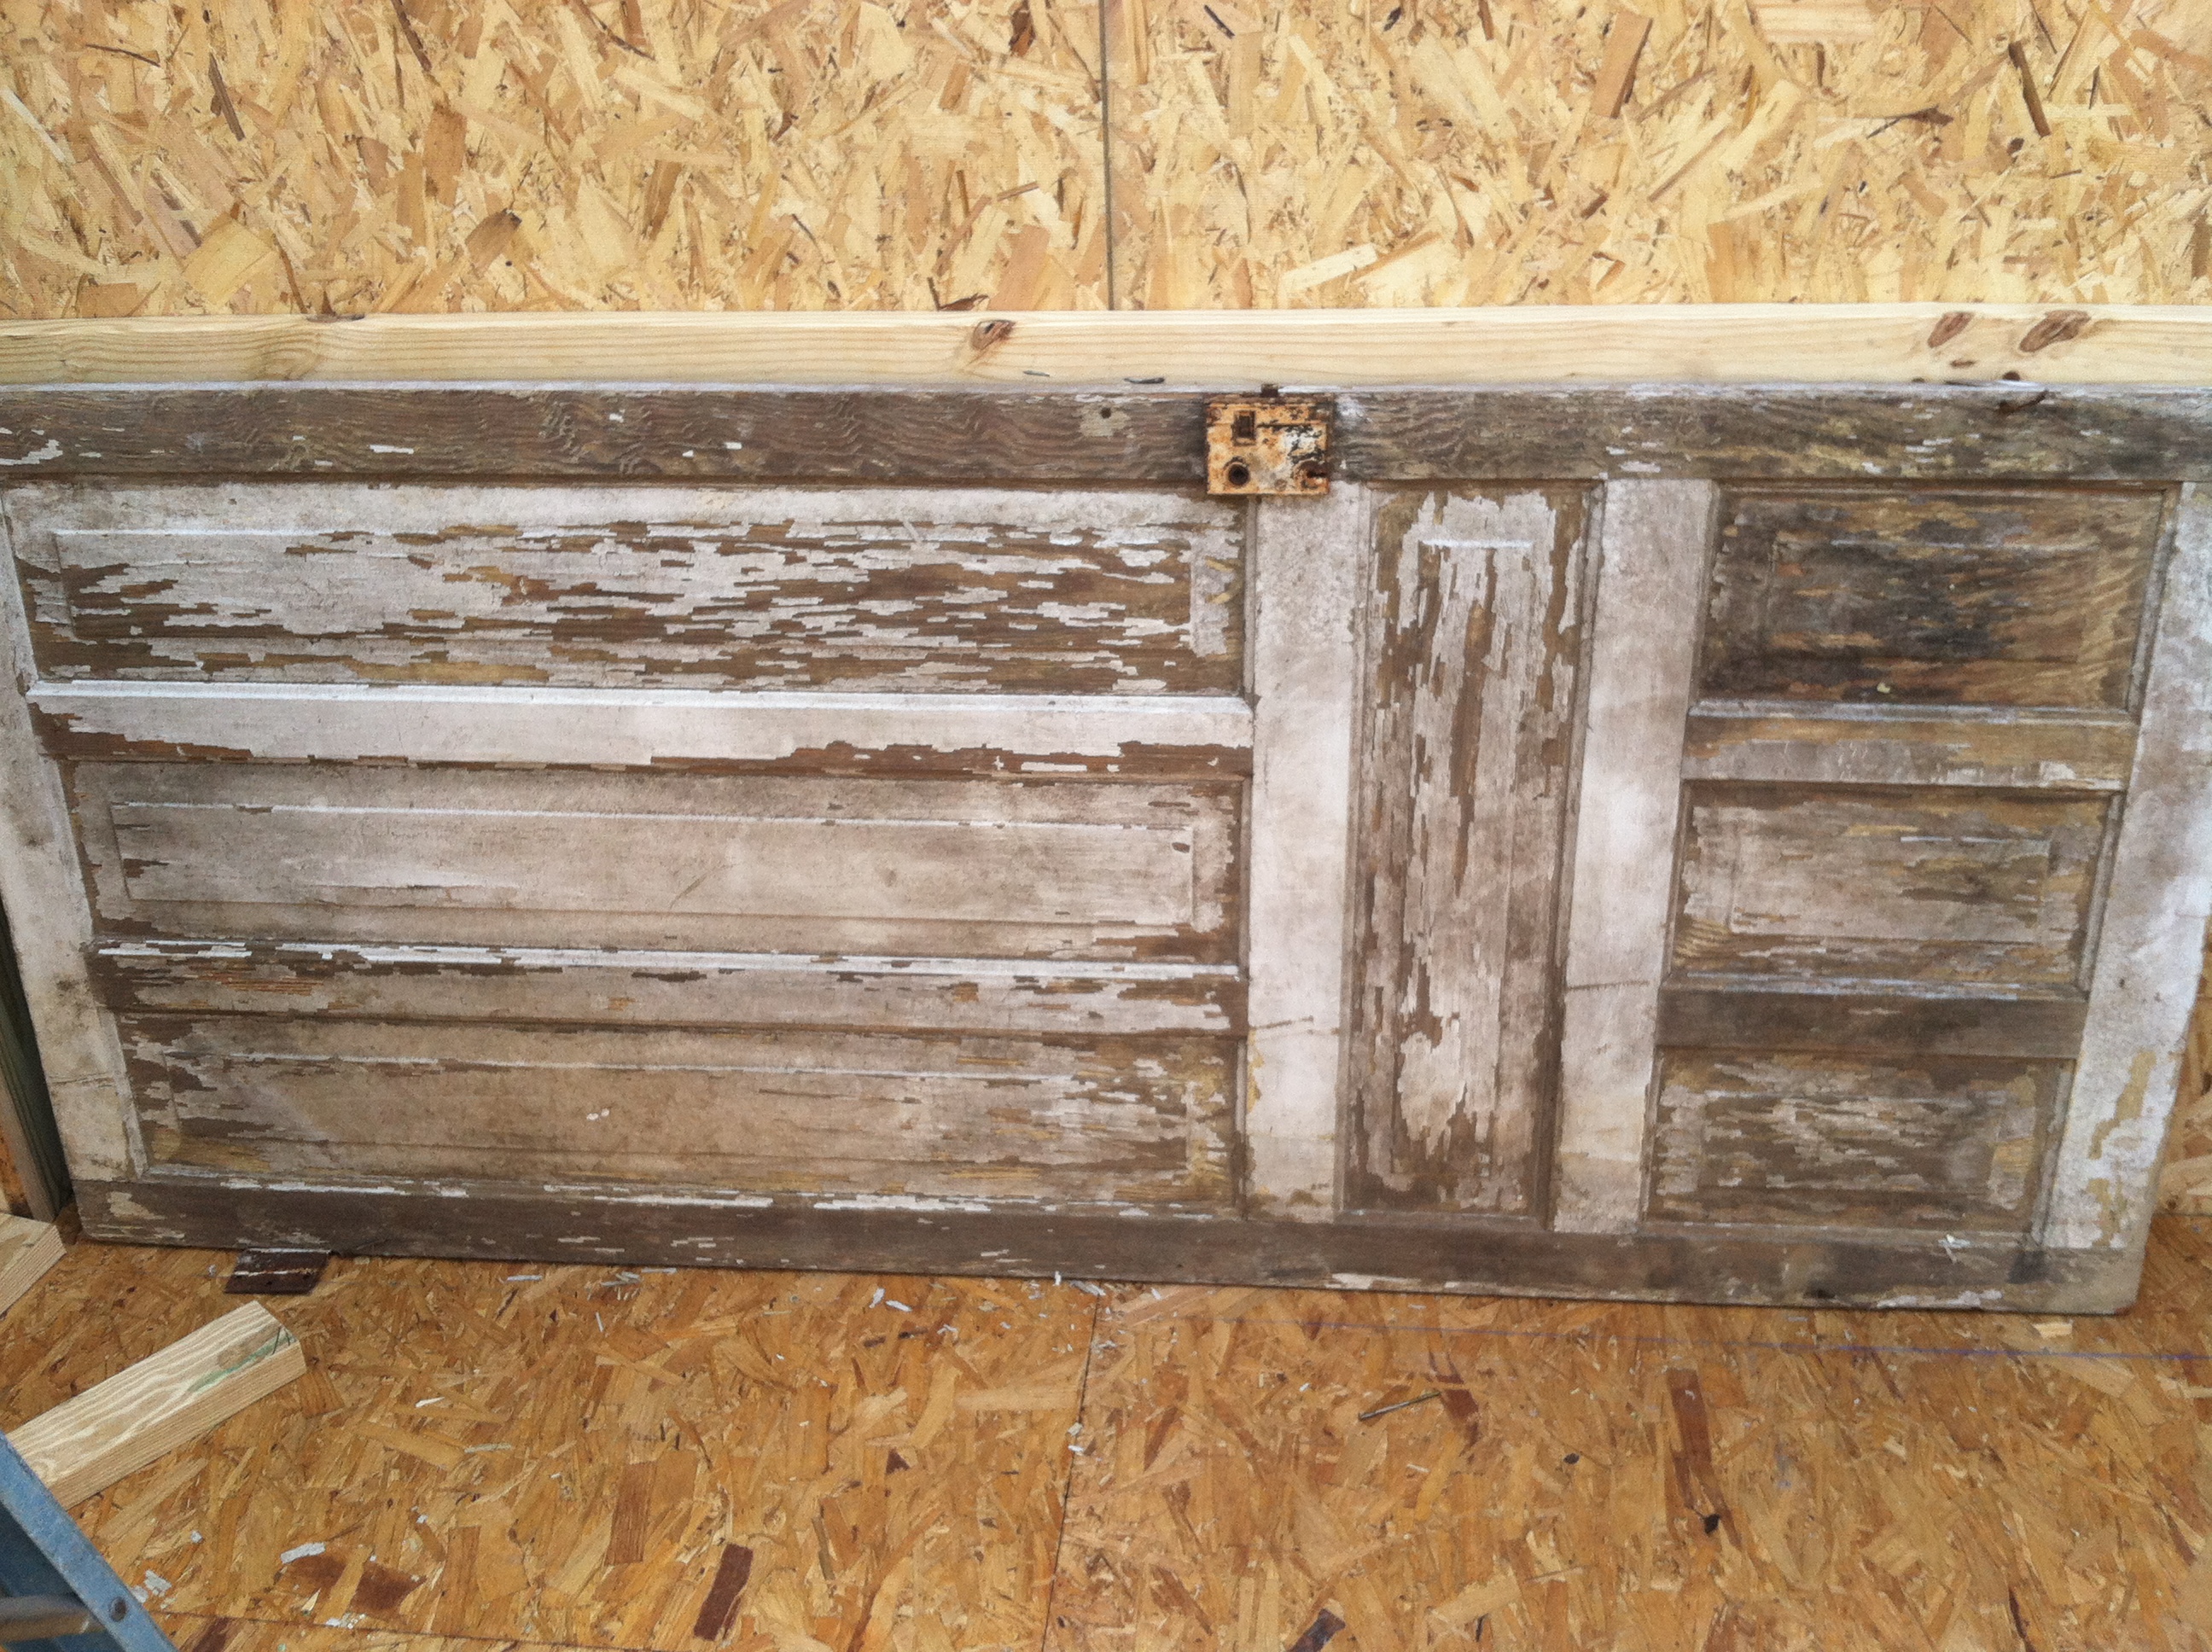 This is an old door from our turn of the century farm house. Cost $0.00